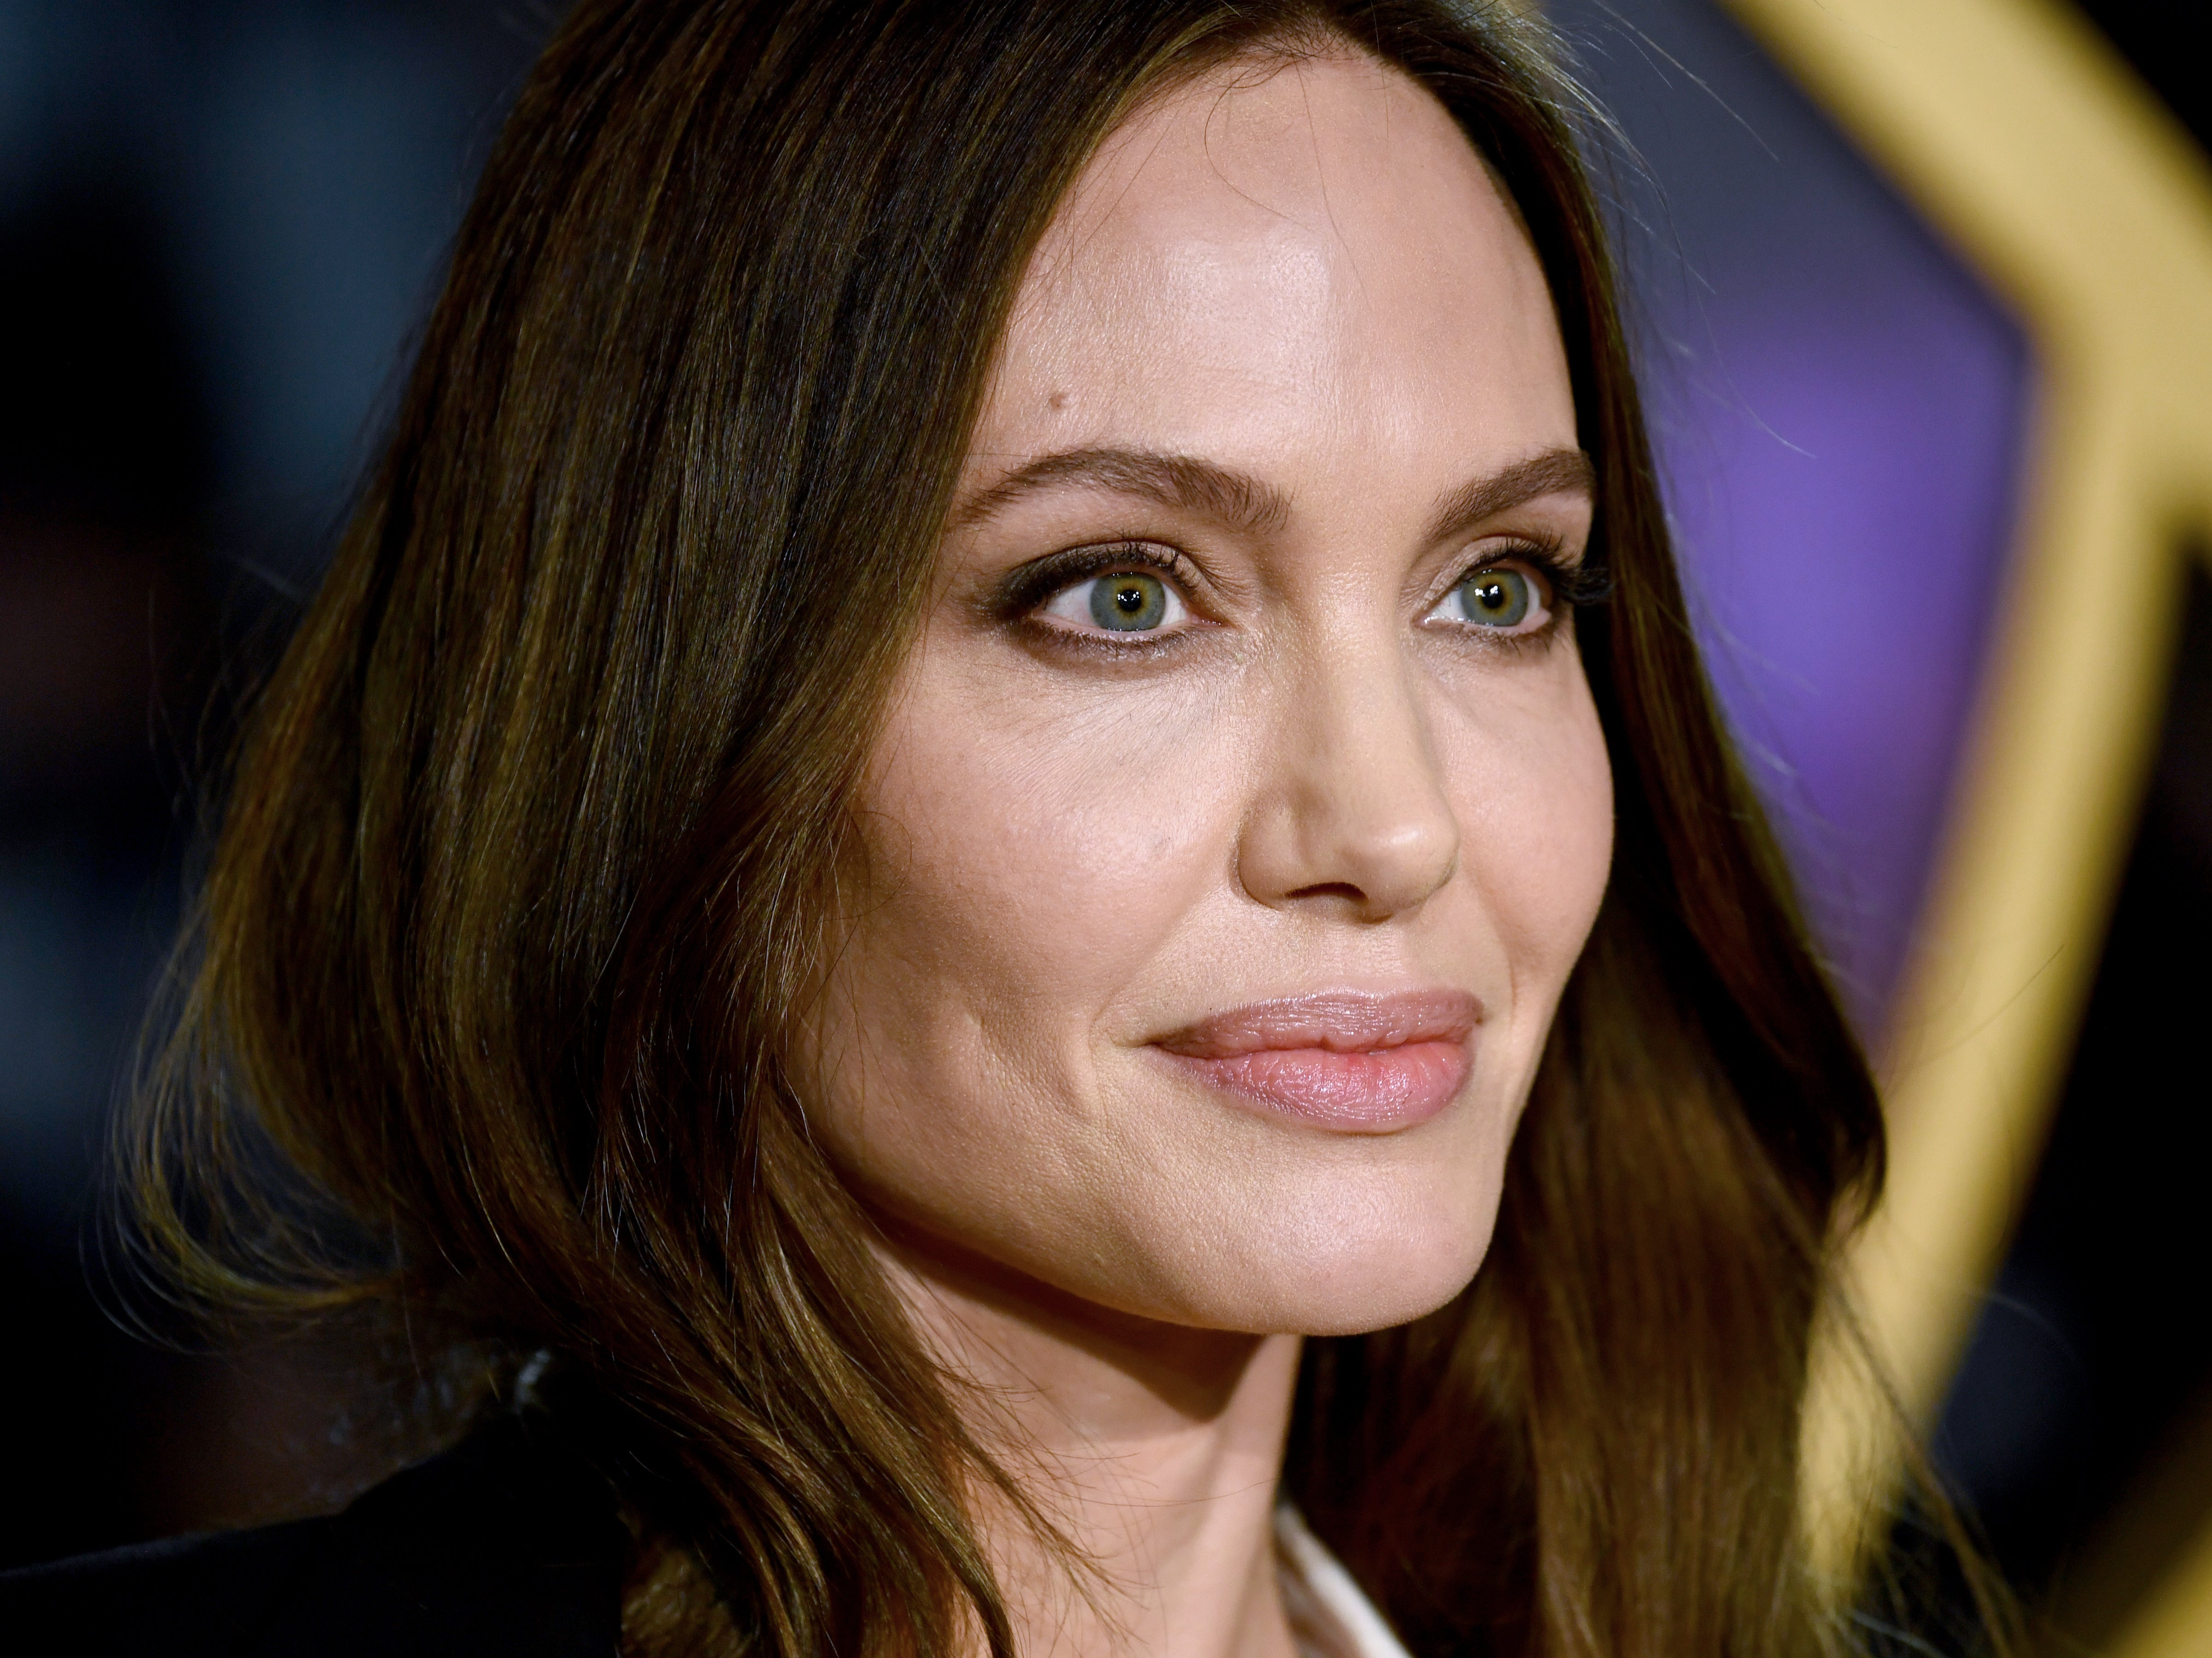 Angelina Jolie attends a screening of ‘Eternals’ on 27 October 2021 in London